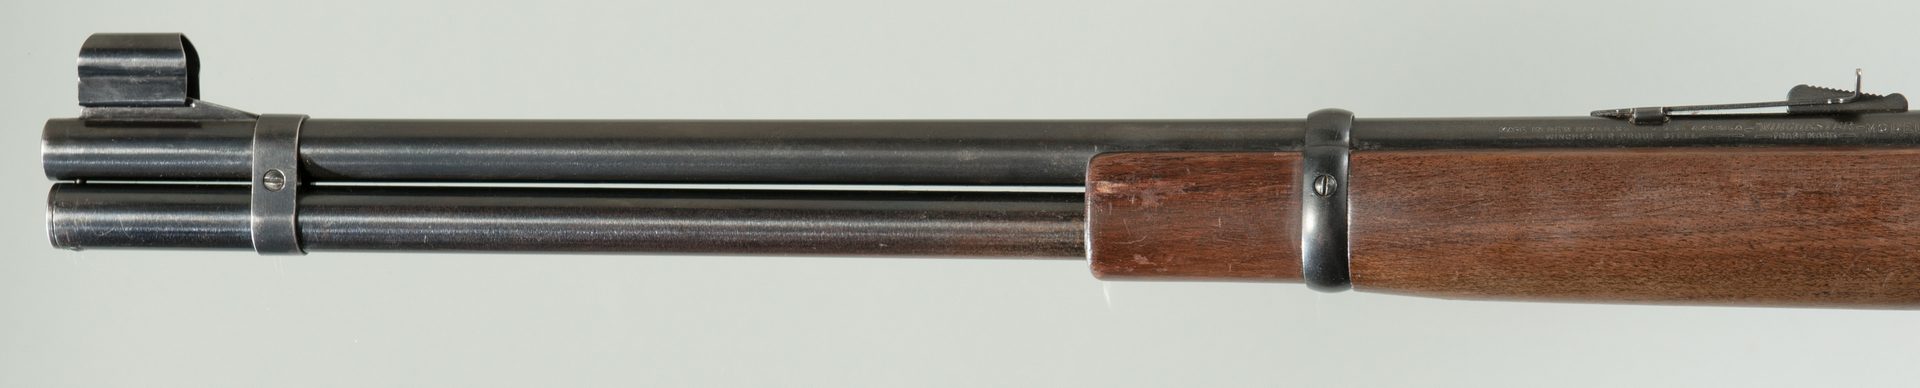 Lot 824: Winchester Model 1894, 30-30 Win Lever Action Rifle